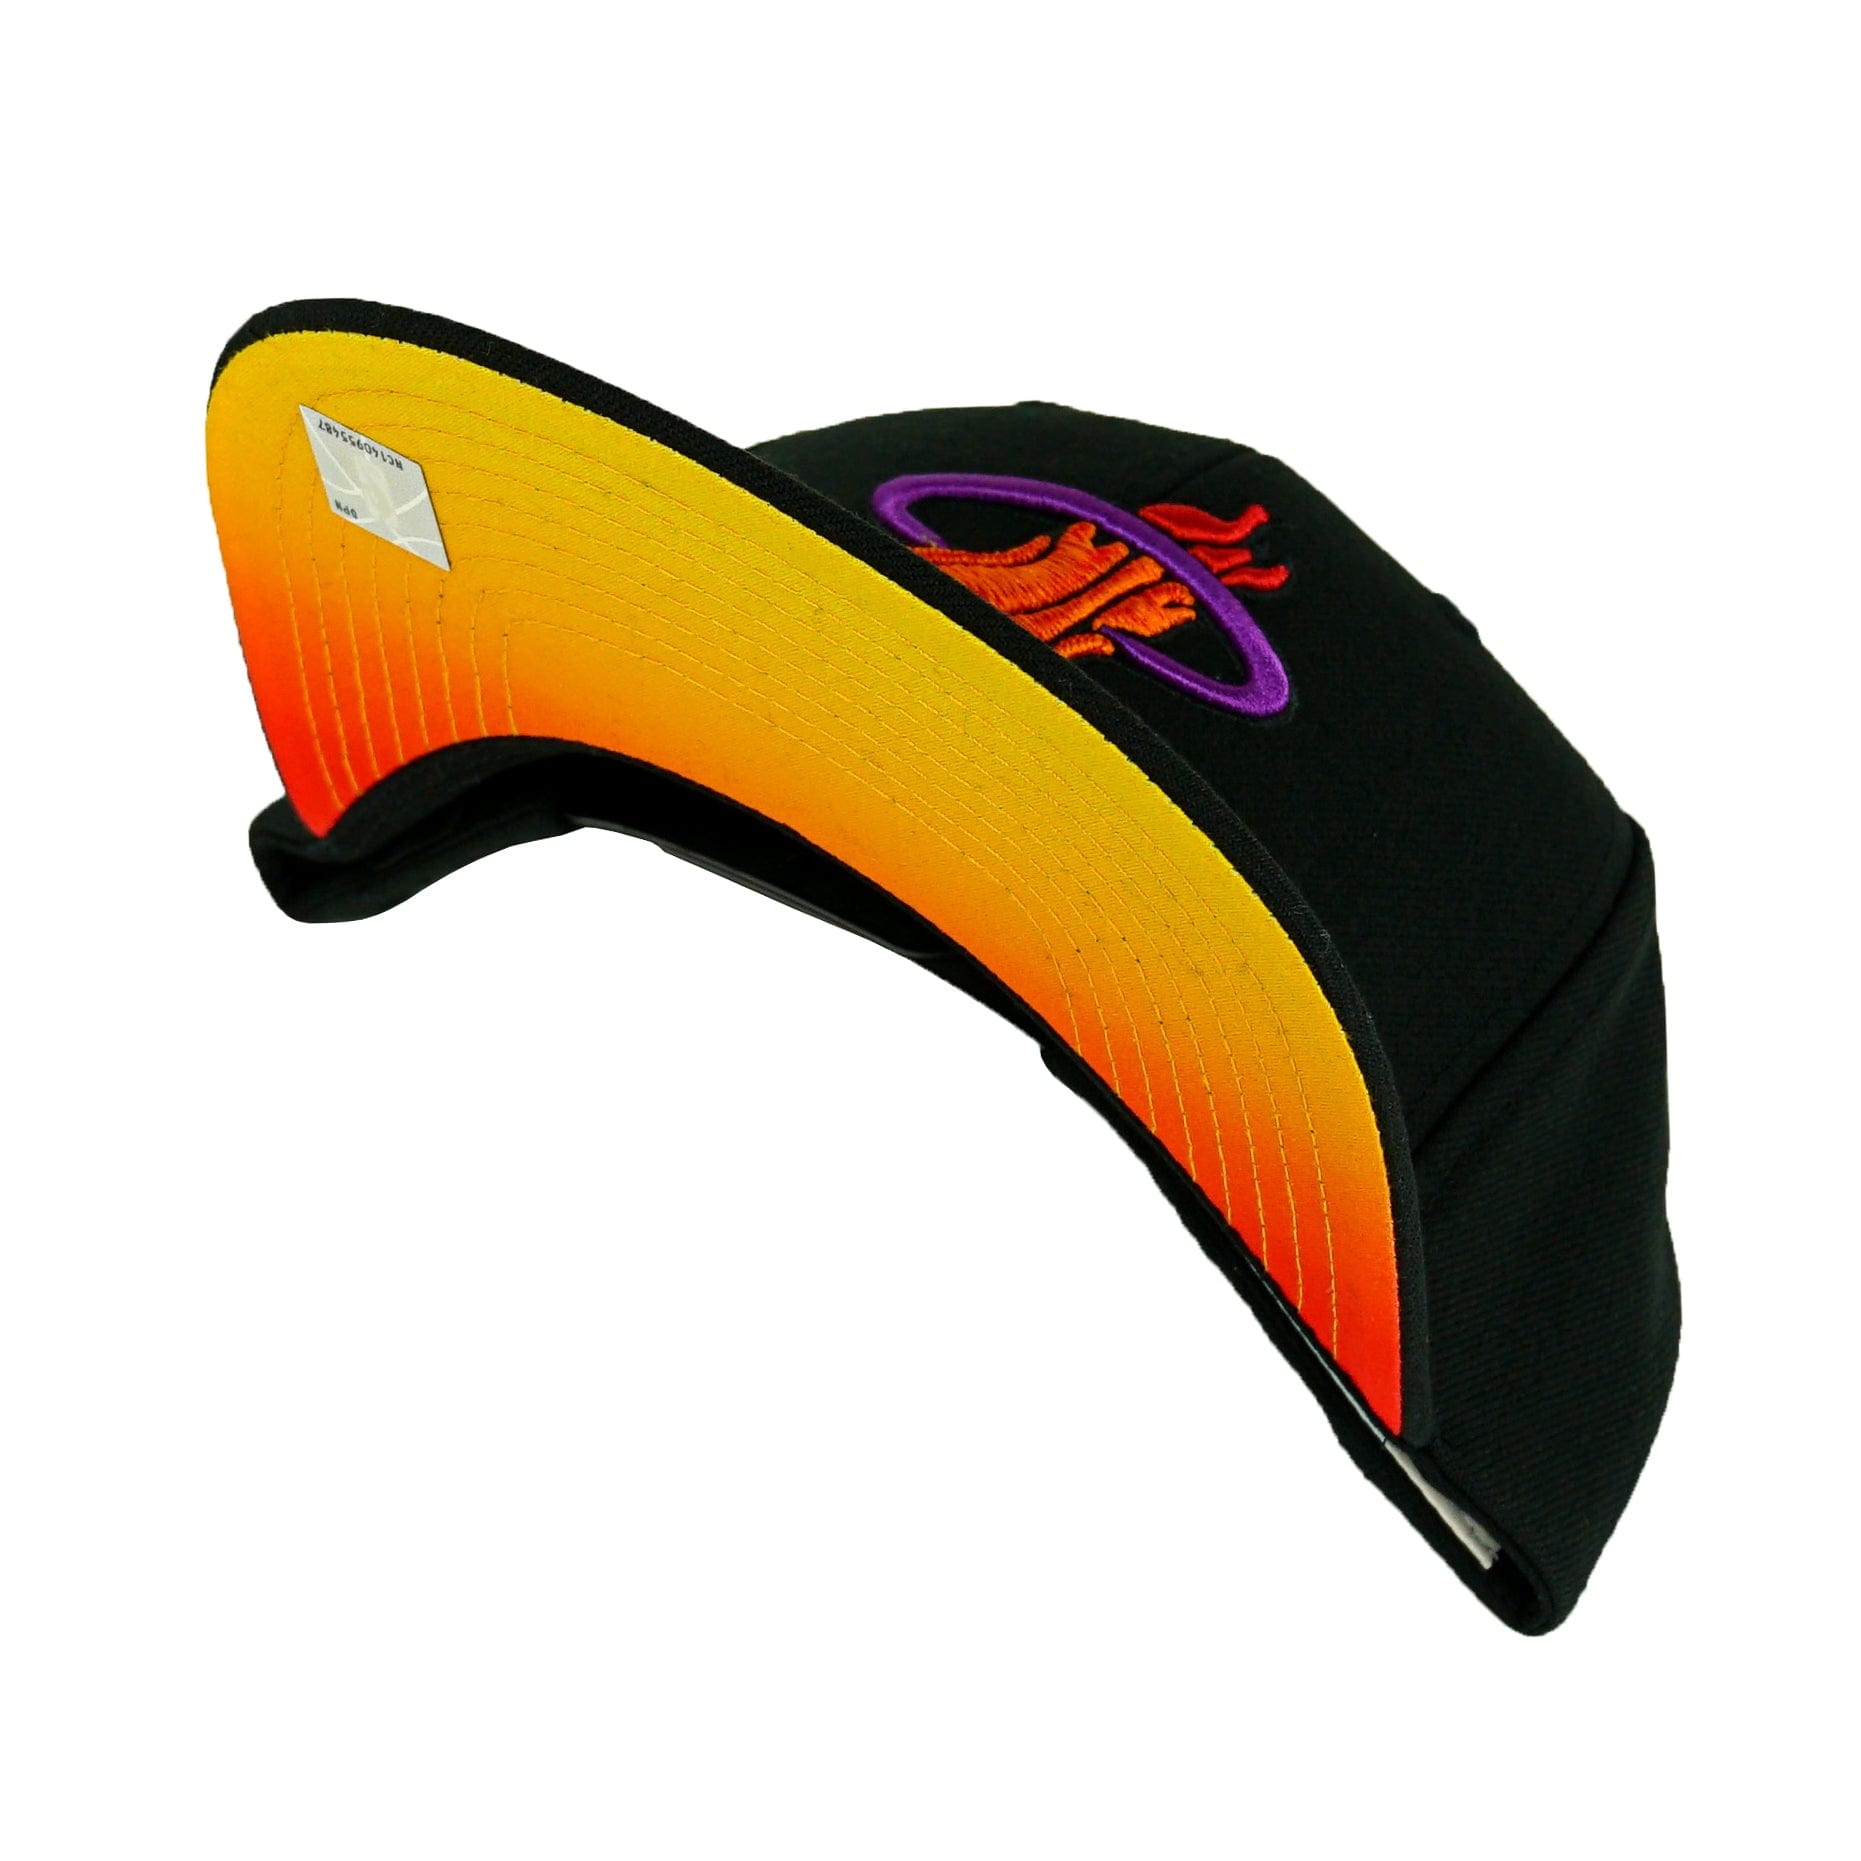 Miami Heat High Grade Snapback Hat in black - Mitchell & Ness - State Of Flux